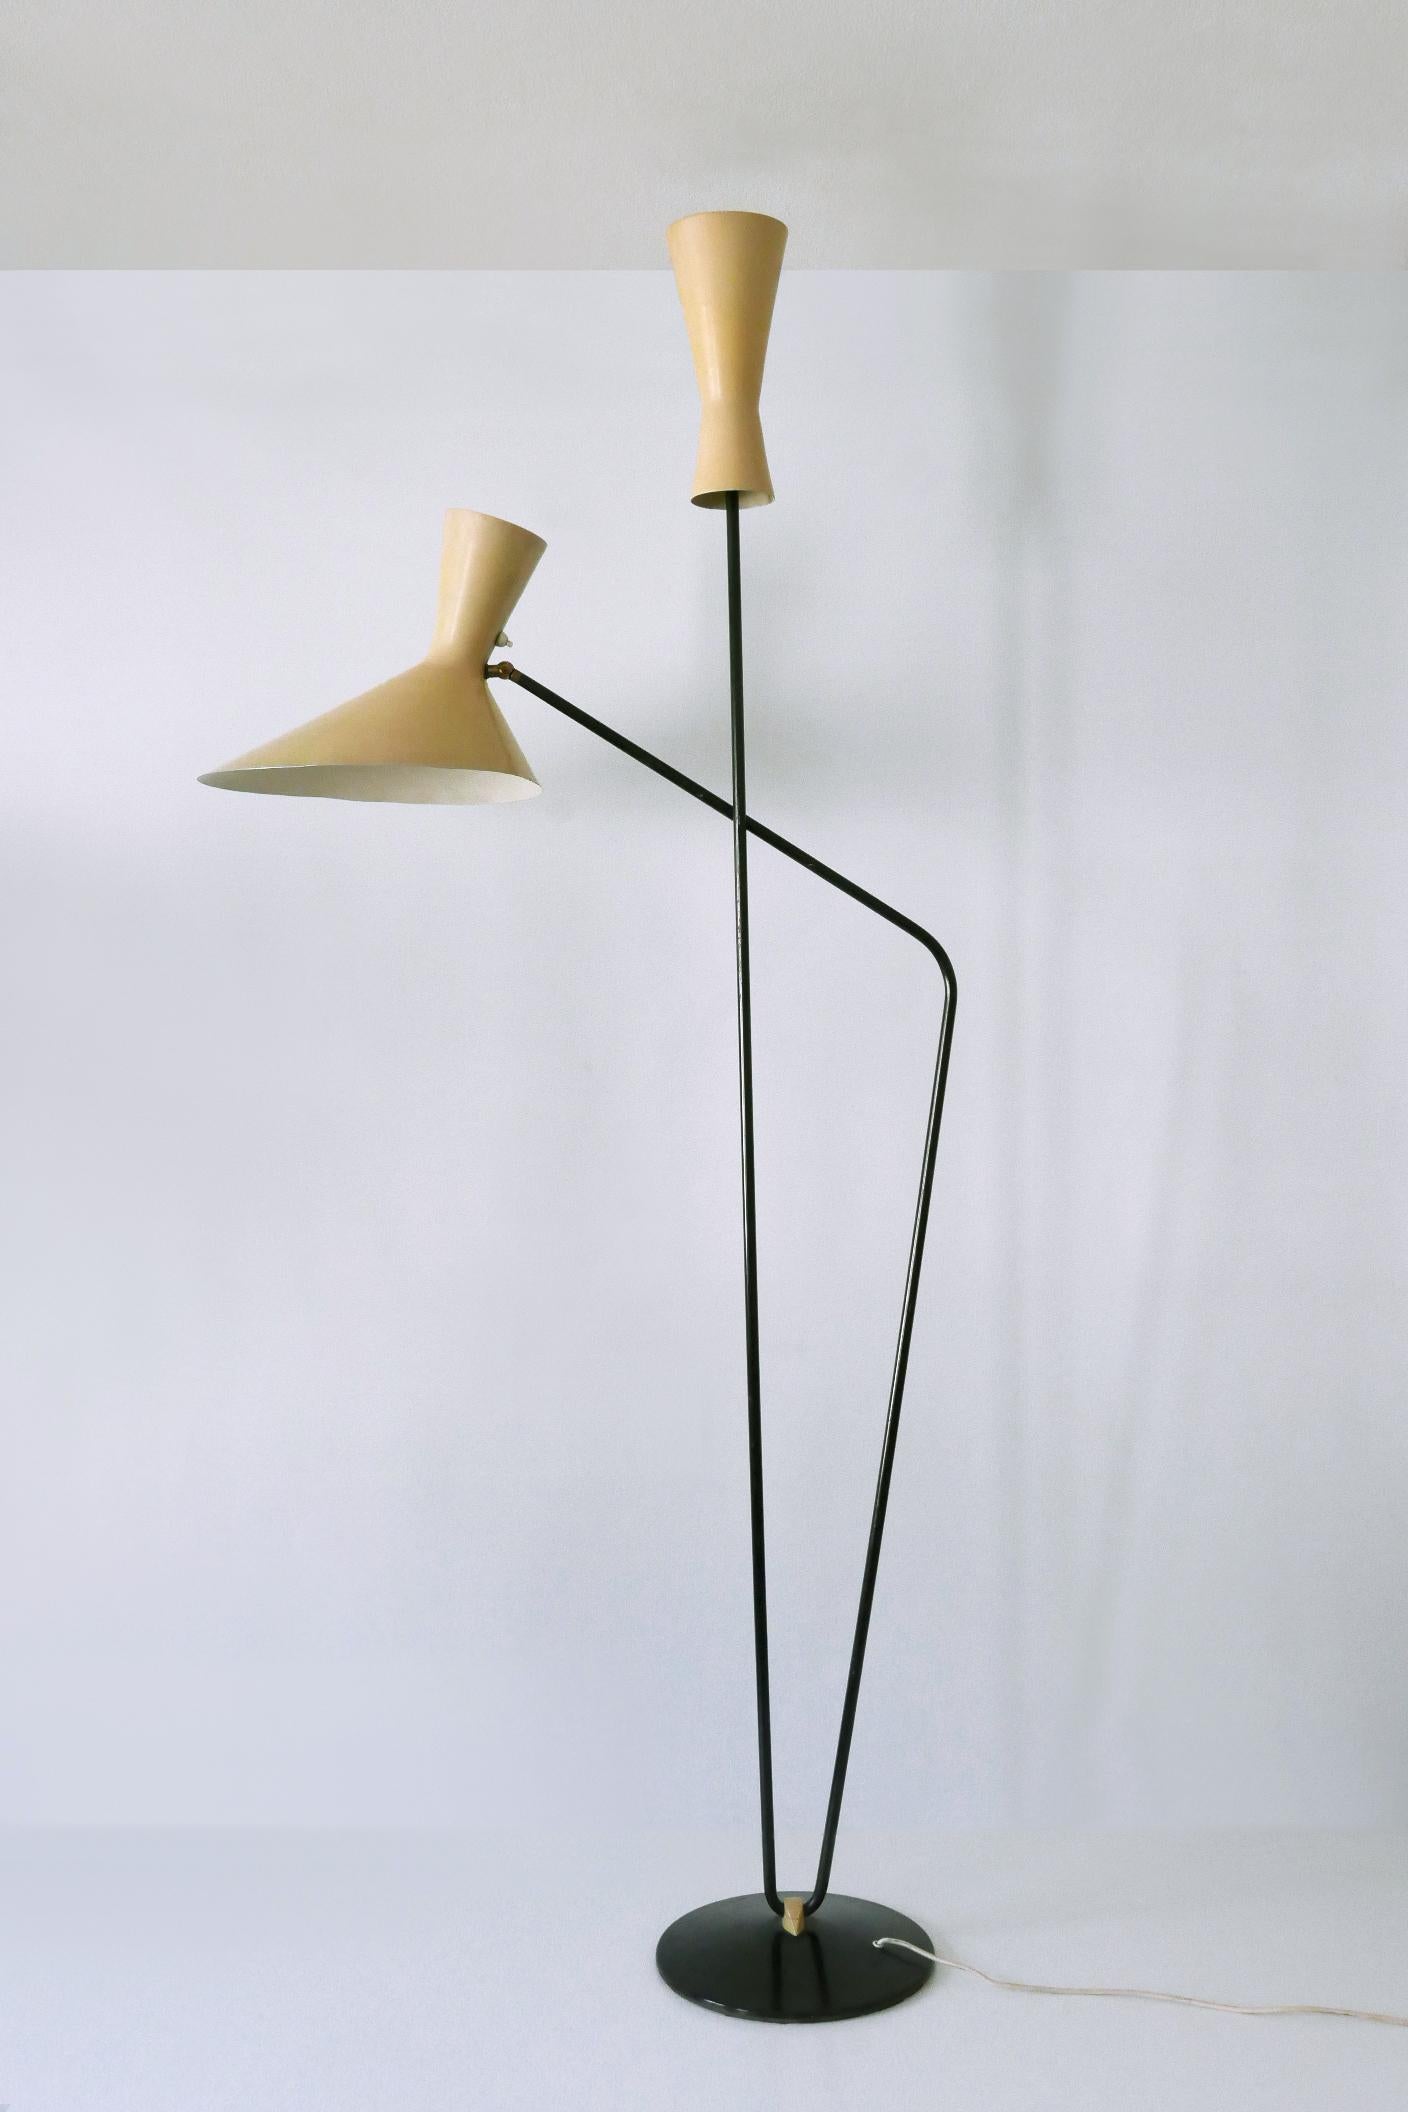 Rare Iconic Mid-Century Modern Floor Lamp by Prof. Carl Moor for BAG Turgi 1950s For Sale 2